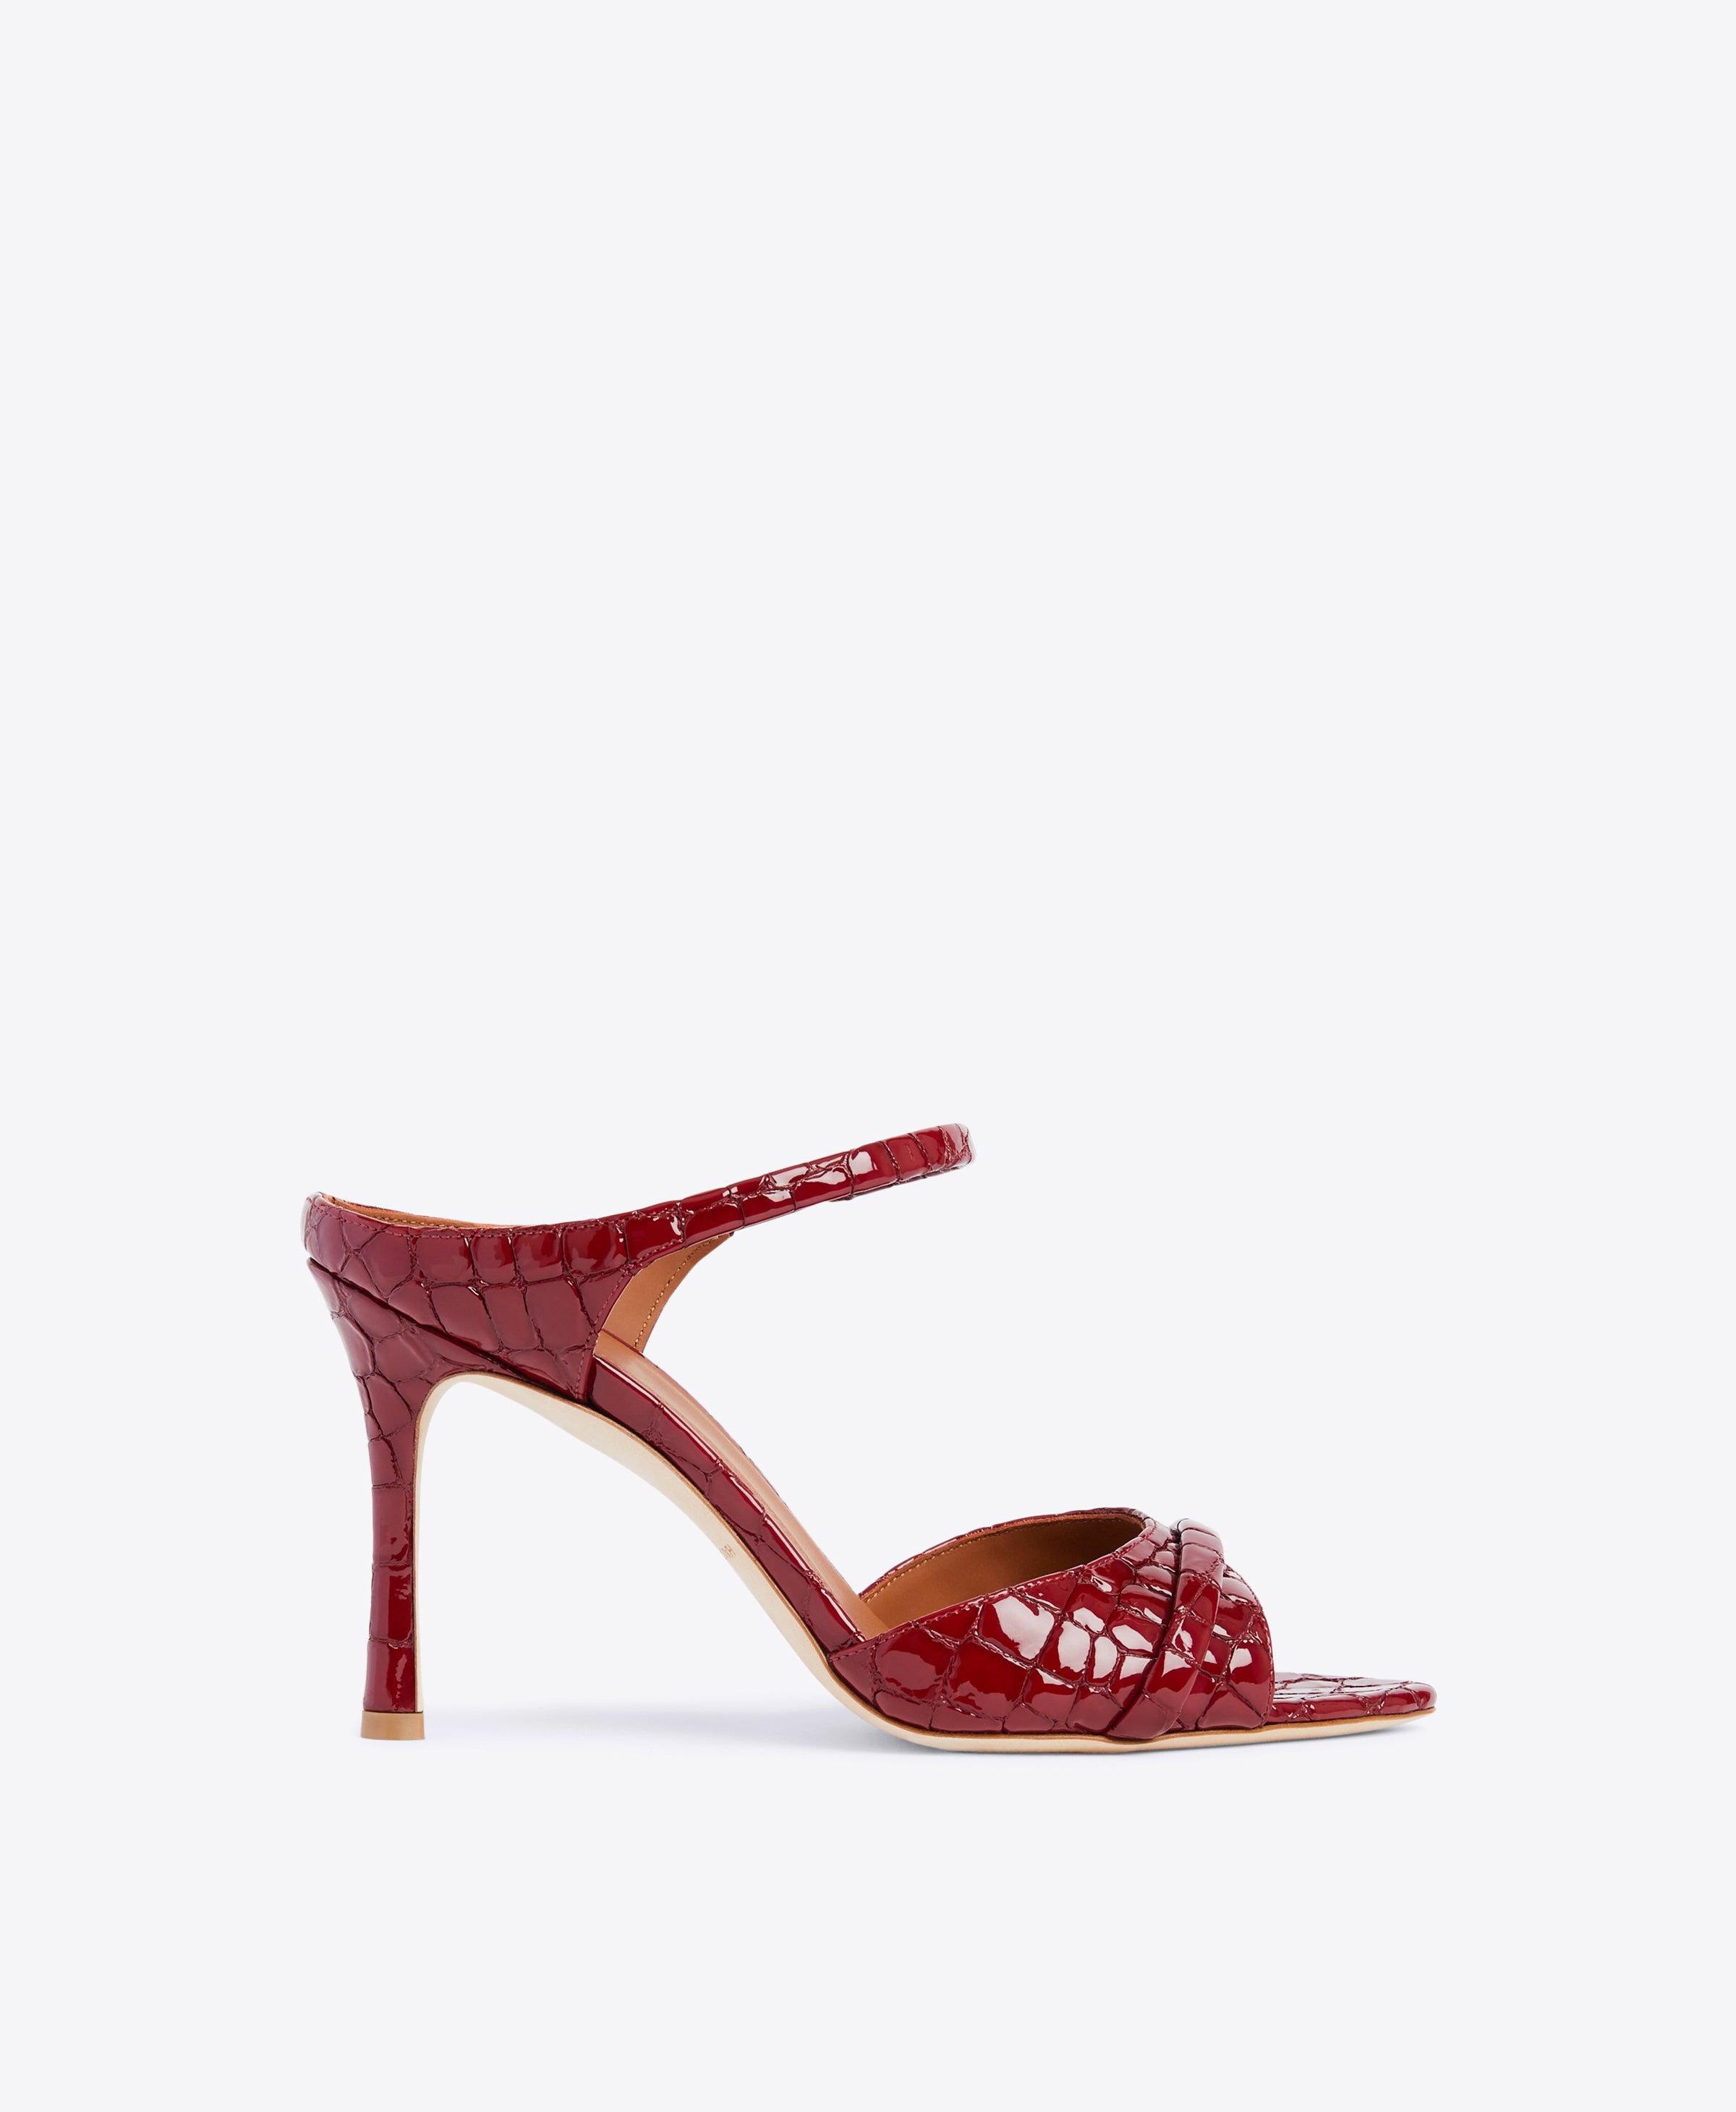 Una Heeled Sandals by Malone Souliers | US 11.5 | Burgundy